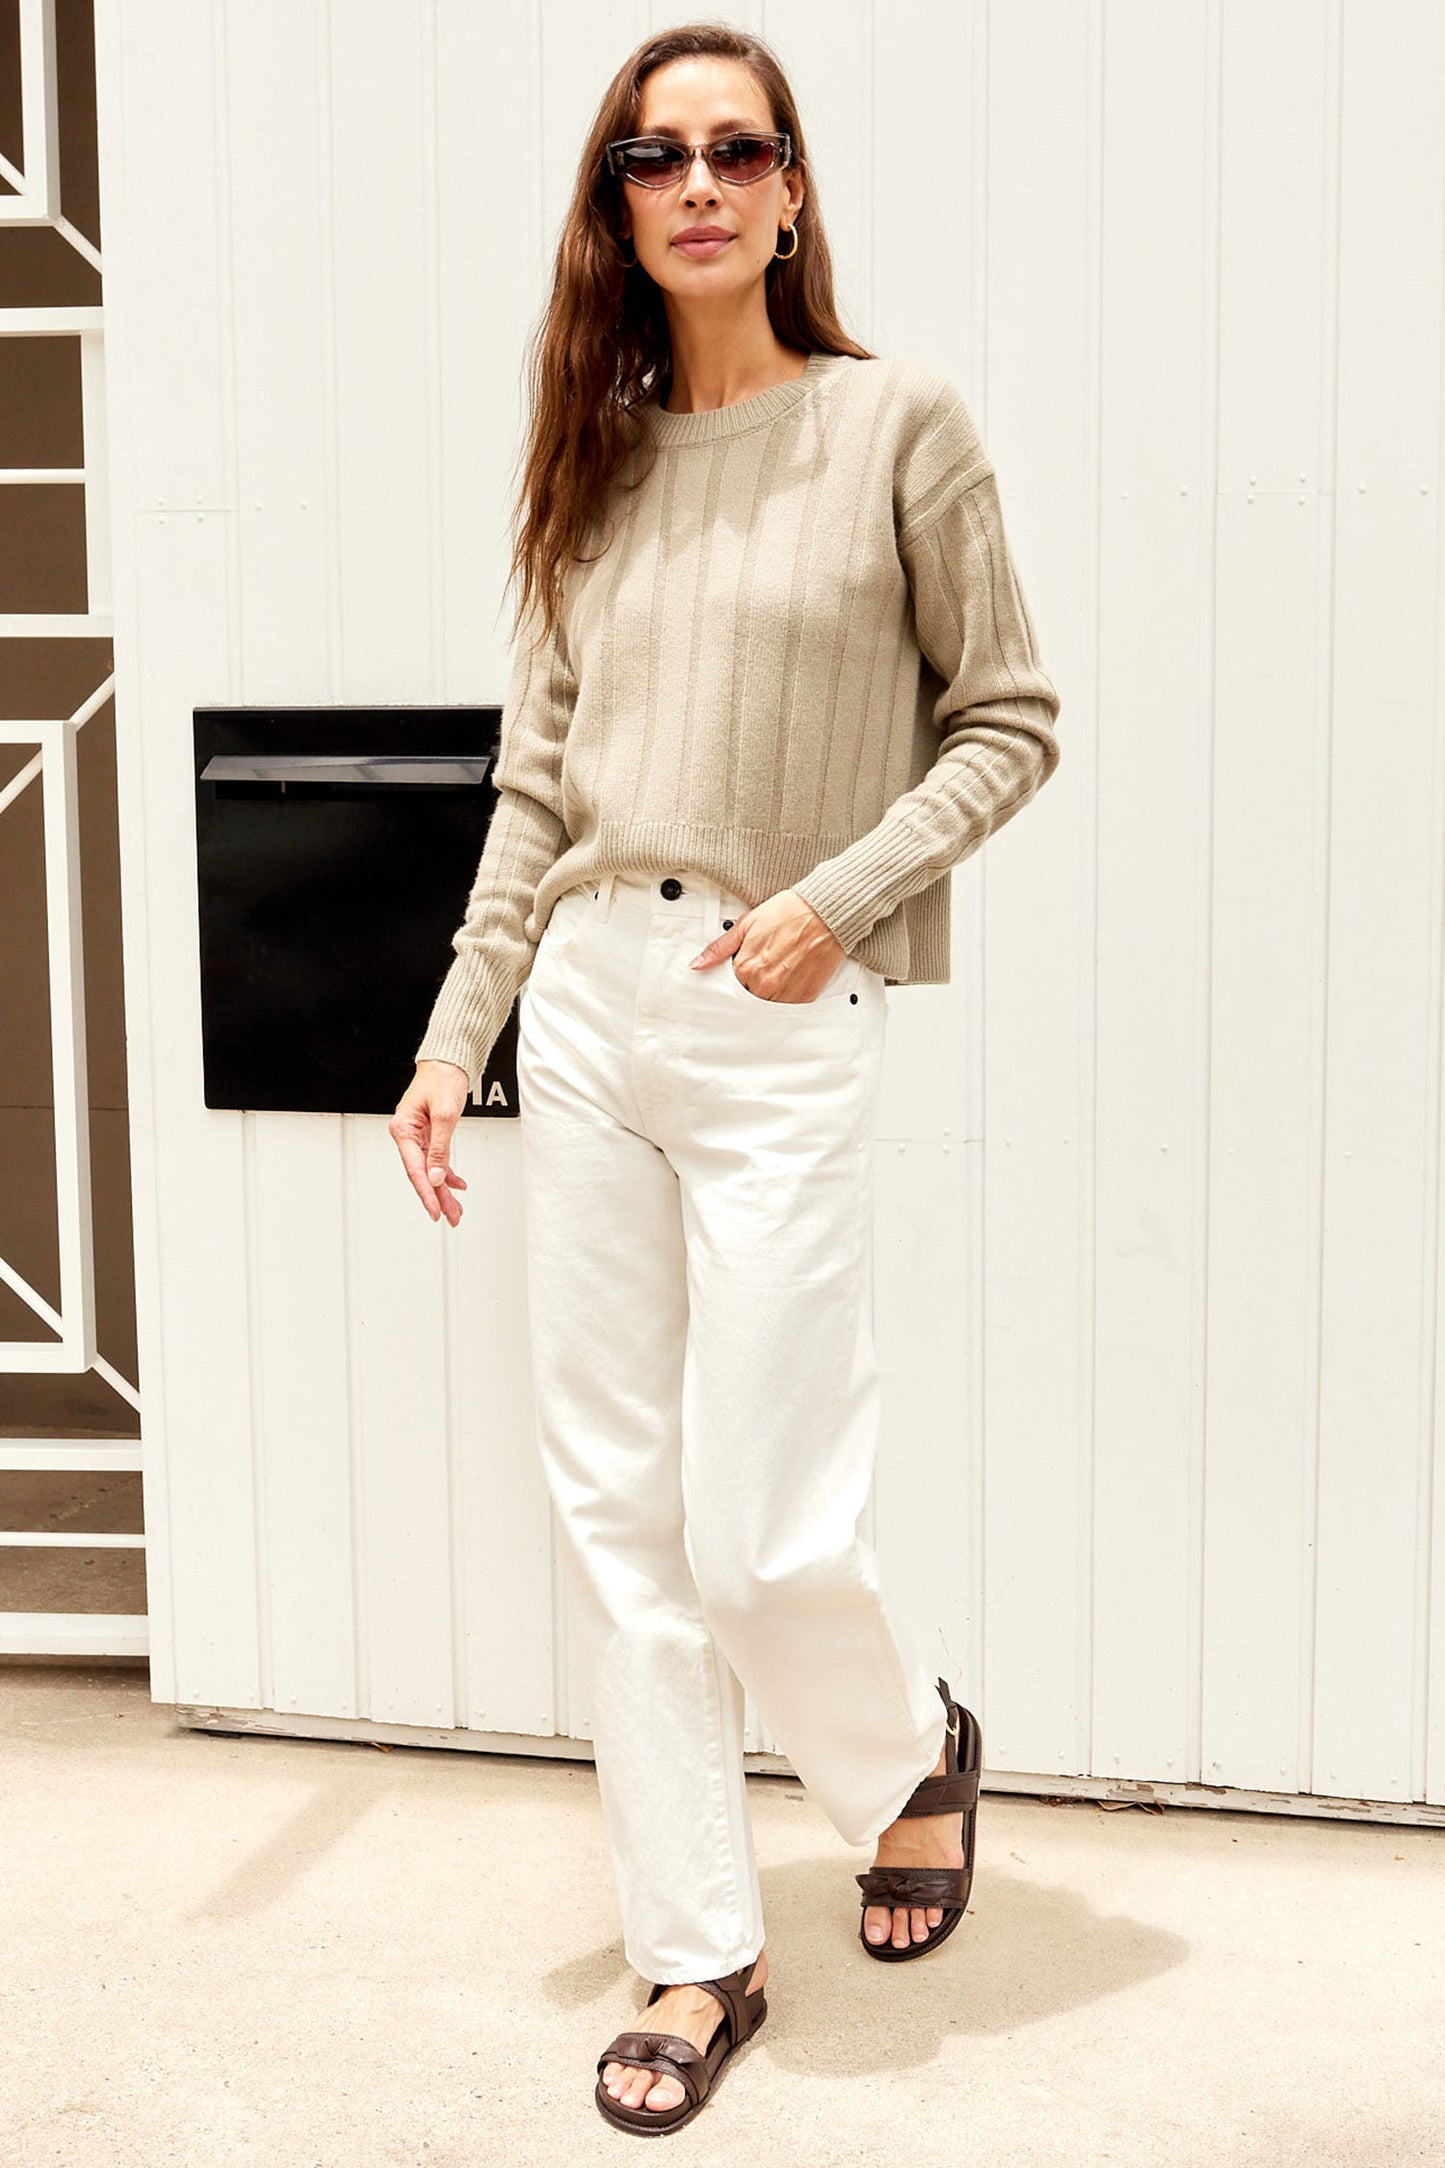 Round Neck Ribbed Cashmere Sweater